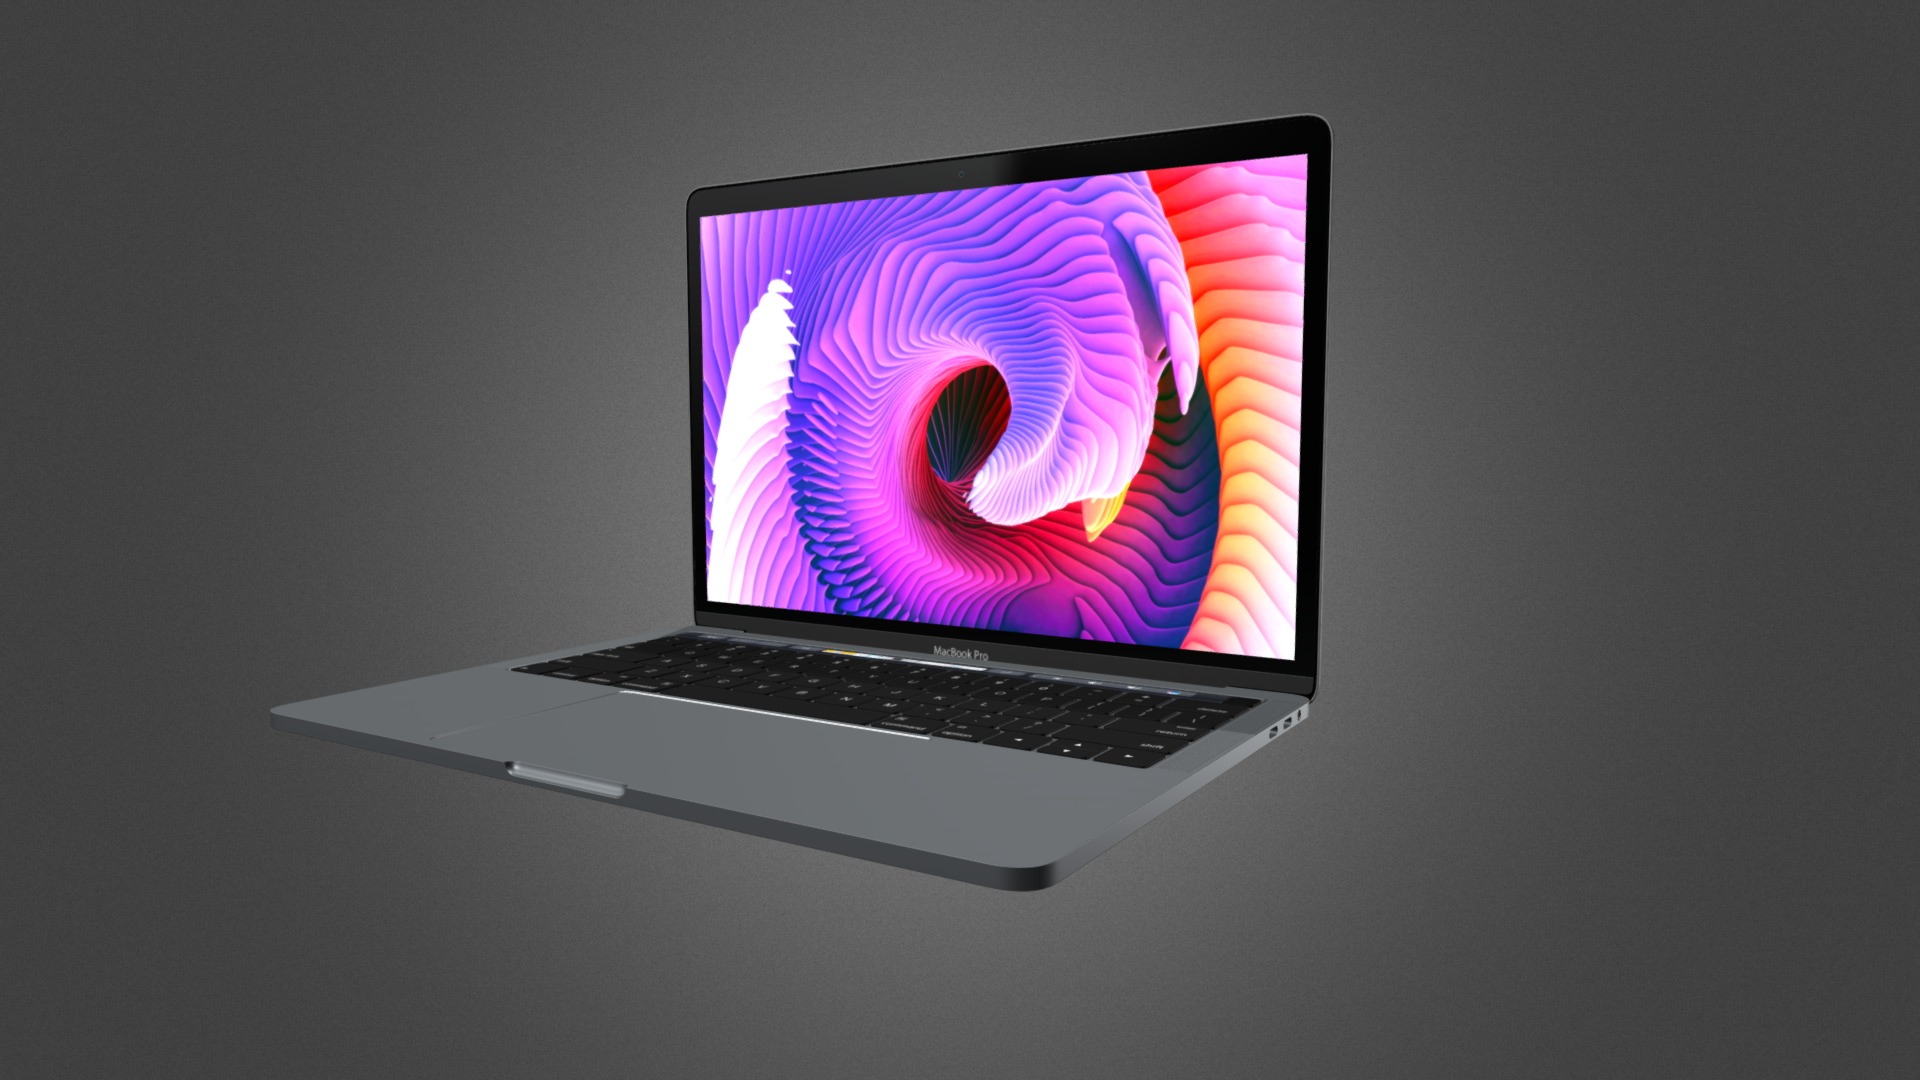 3D model Apple Macbook Pro 13 Inch A1706  for Element 3D - This is a 3D model of the Apple Macbook Pro 13 Inch A1706  for Element 3D. The 3D model is about a laptop with a logo on the screen.